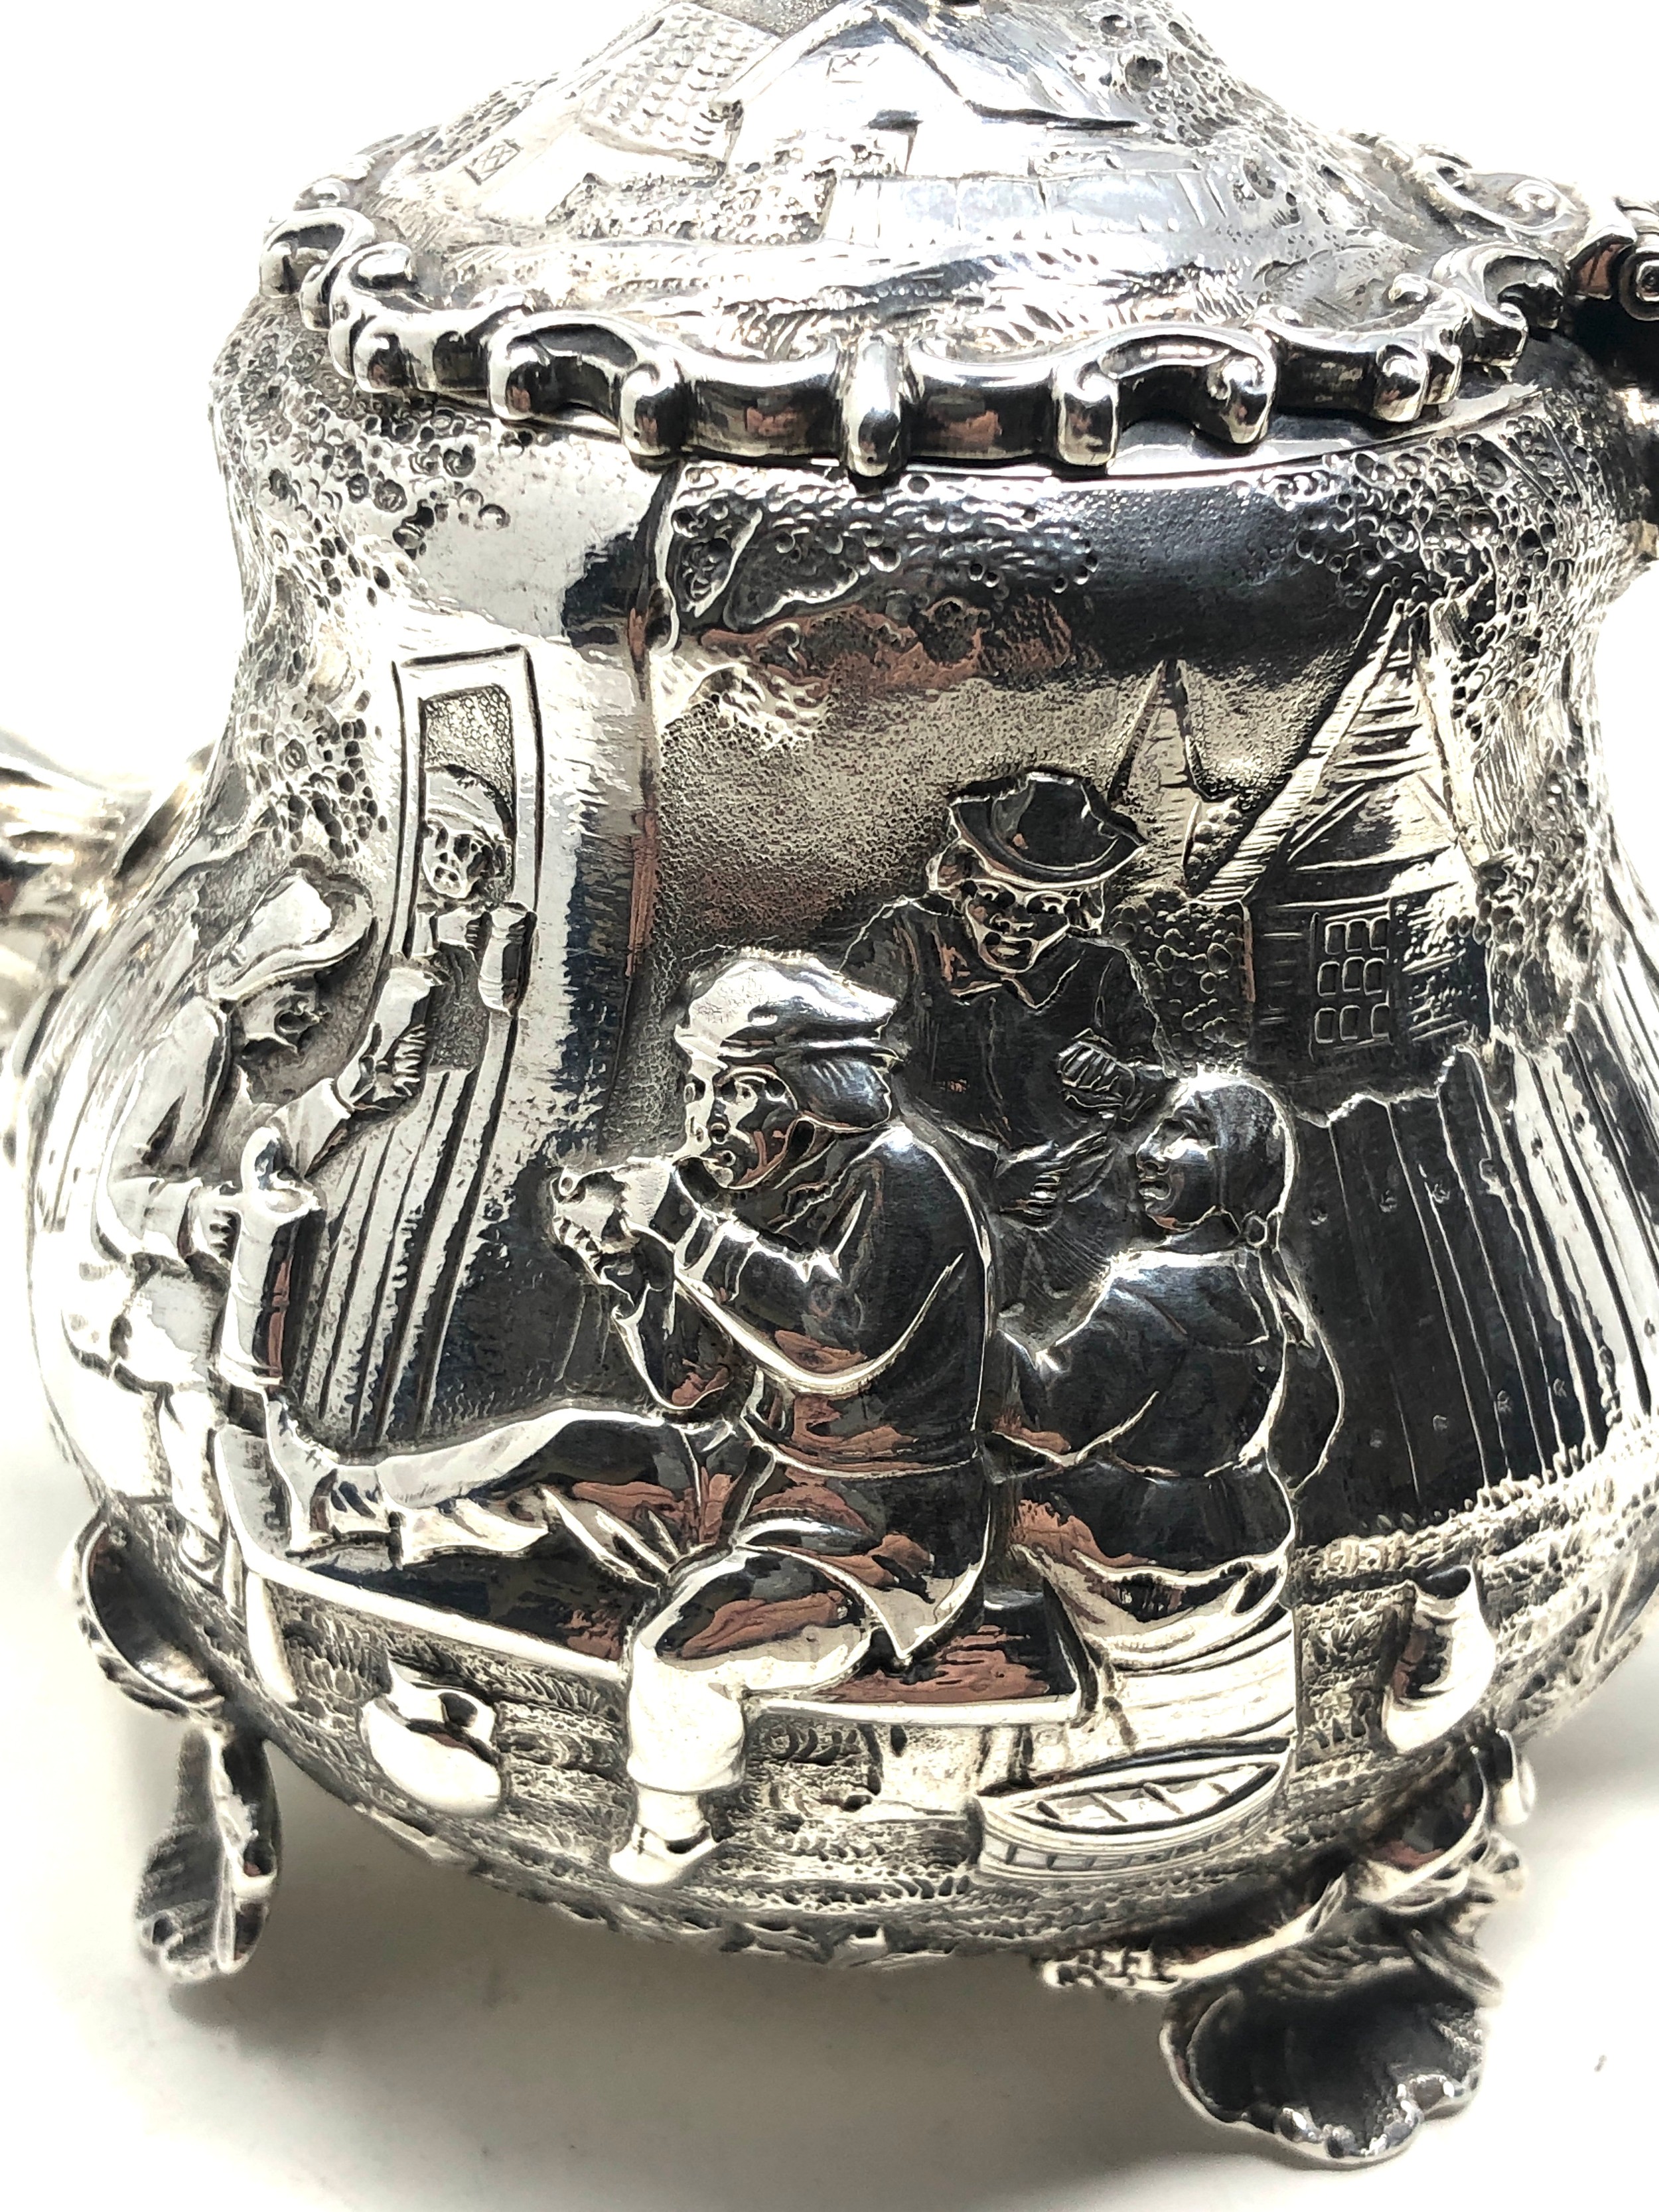 Fine Antique Victorian silver bachelor teapot either side with scenes after "Tennier" London - Image 5 of 8